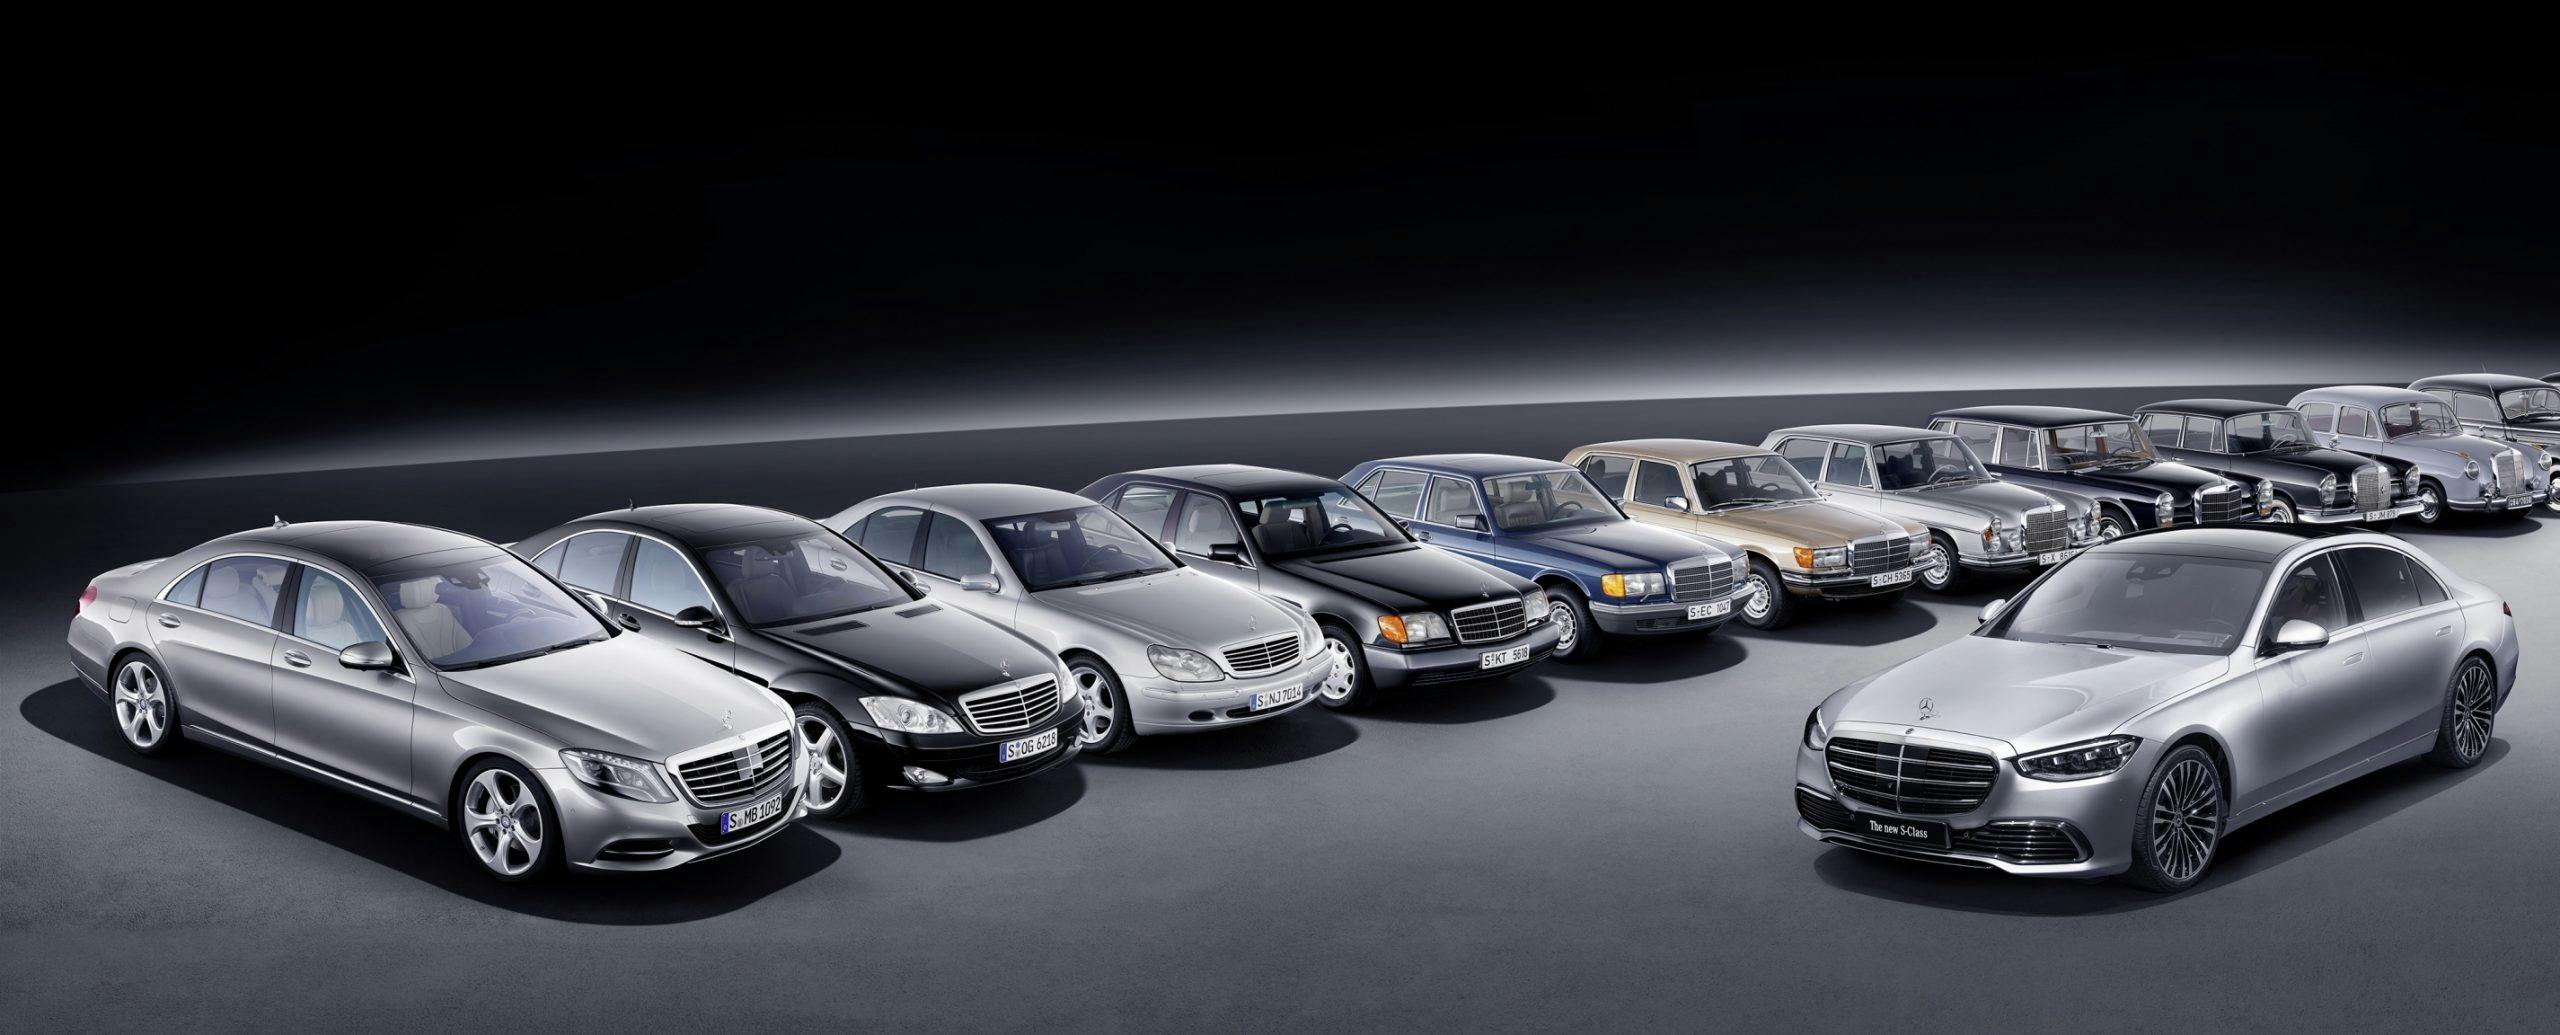 Mercedes-Benz S-Class: A history of firsts - Hagerty Media